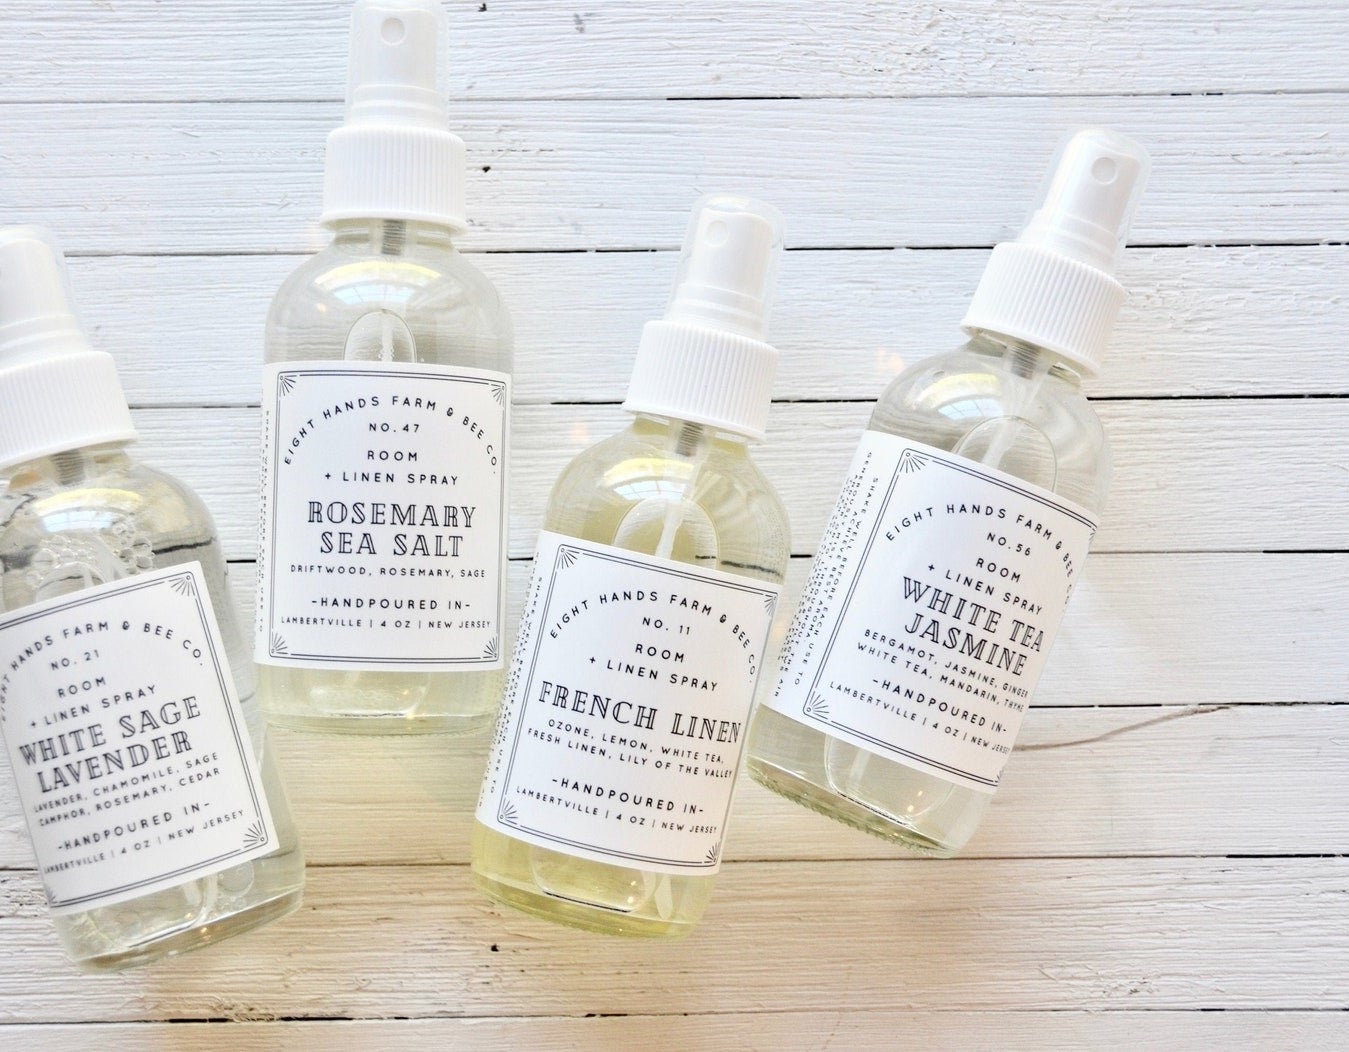 Four bottles of the room and linen spray in different scents